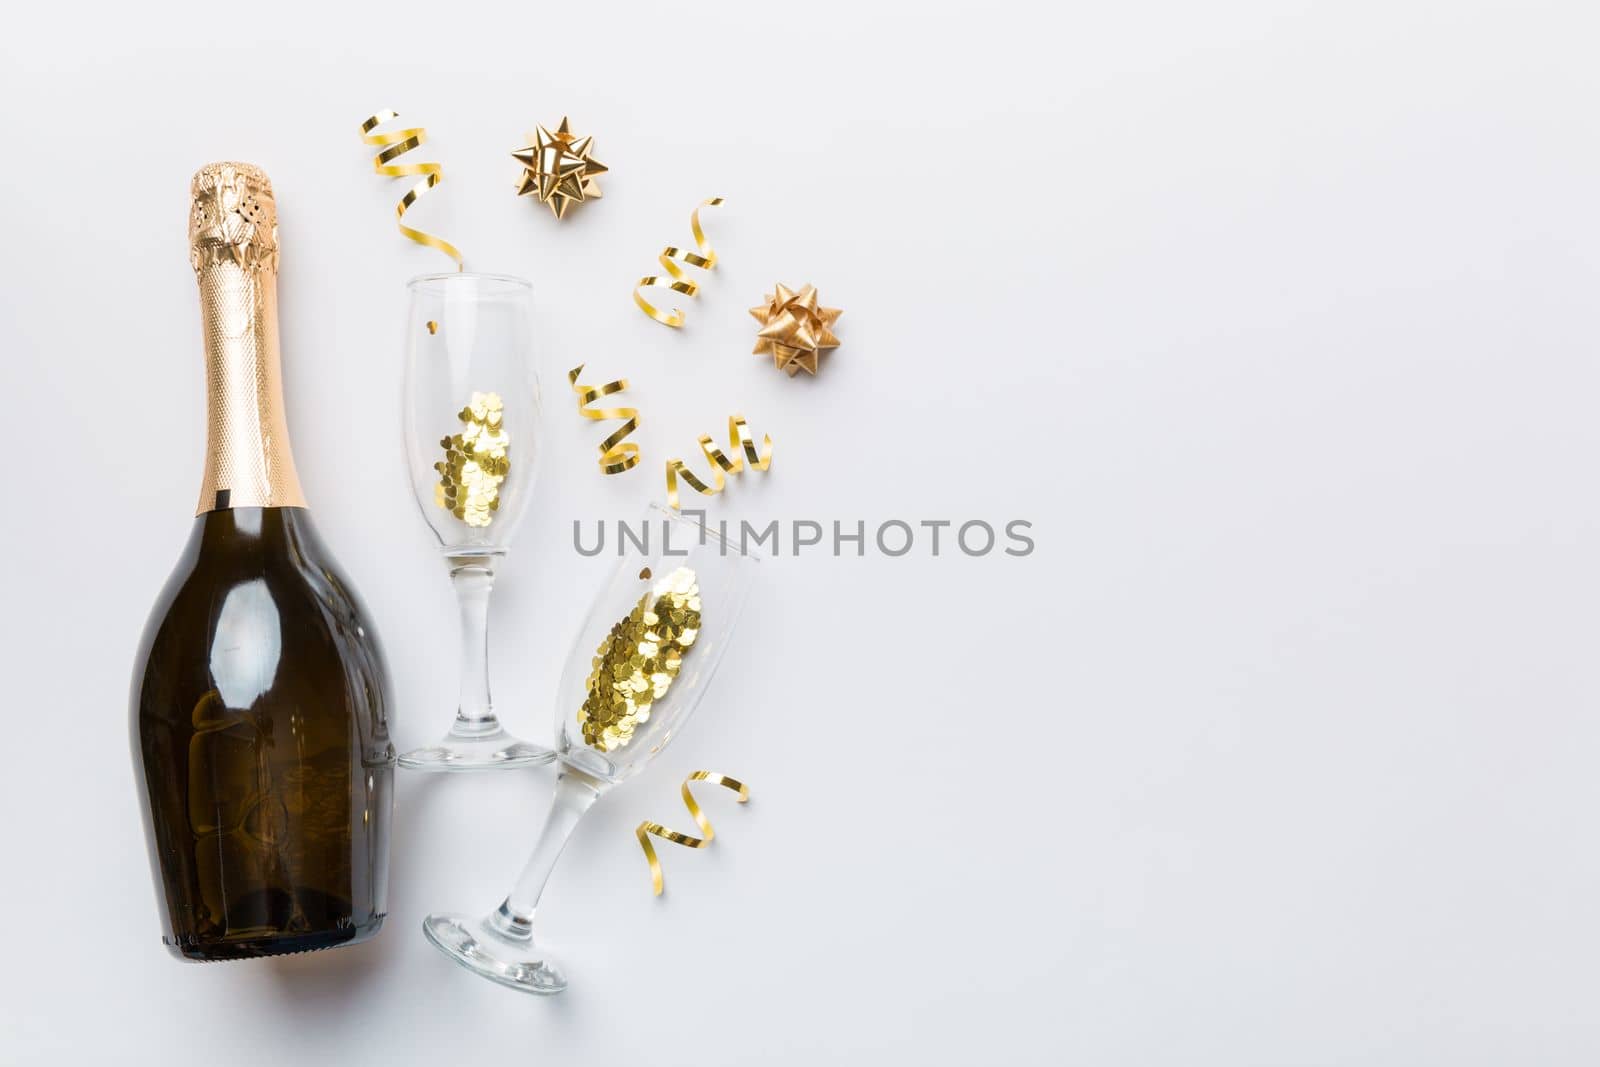 bottle of champagne with glasses and colorful confetti on colored background. top view flay lay.